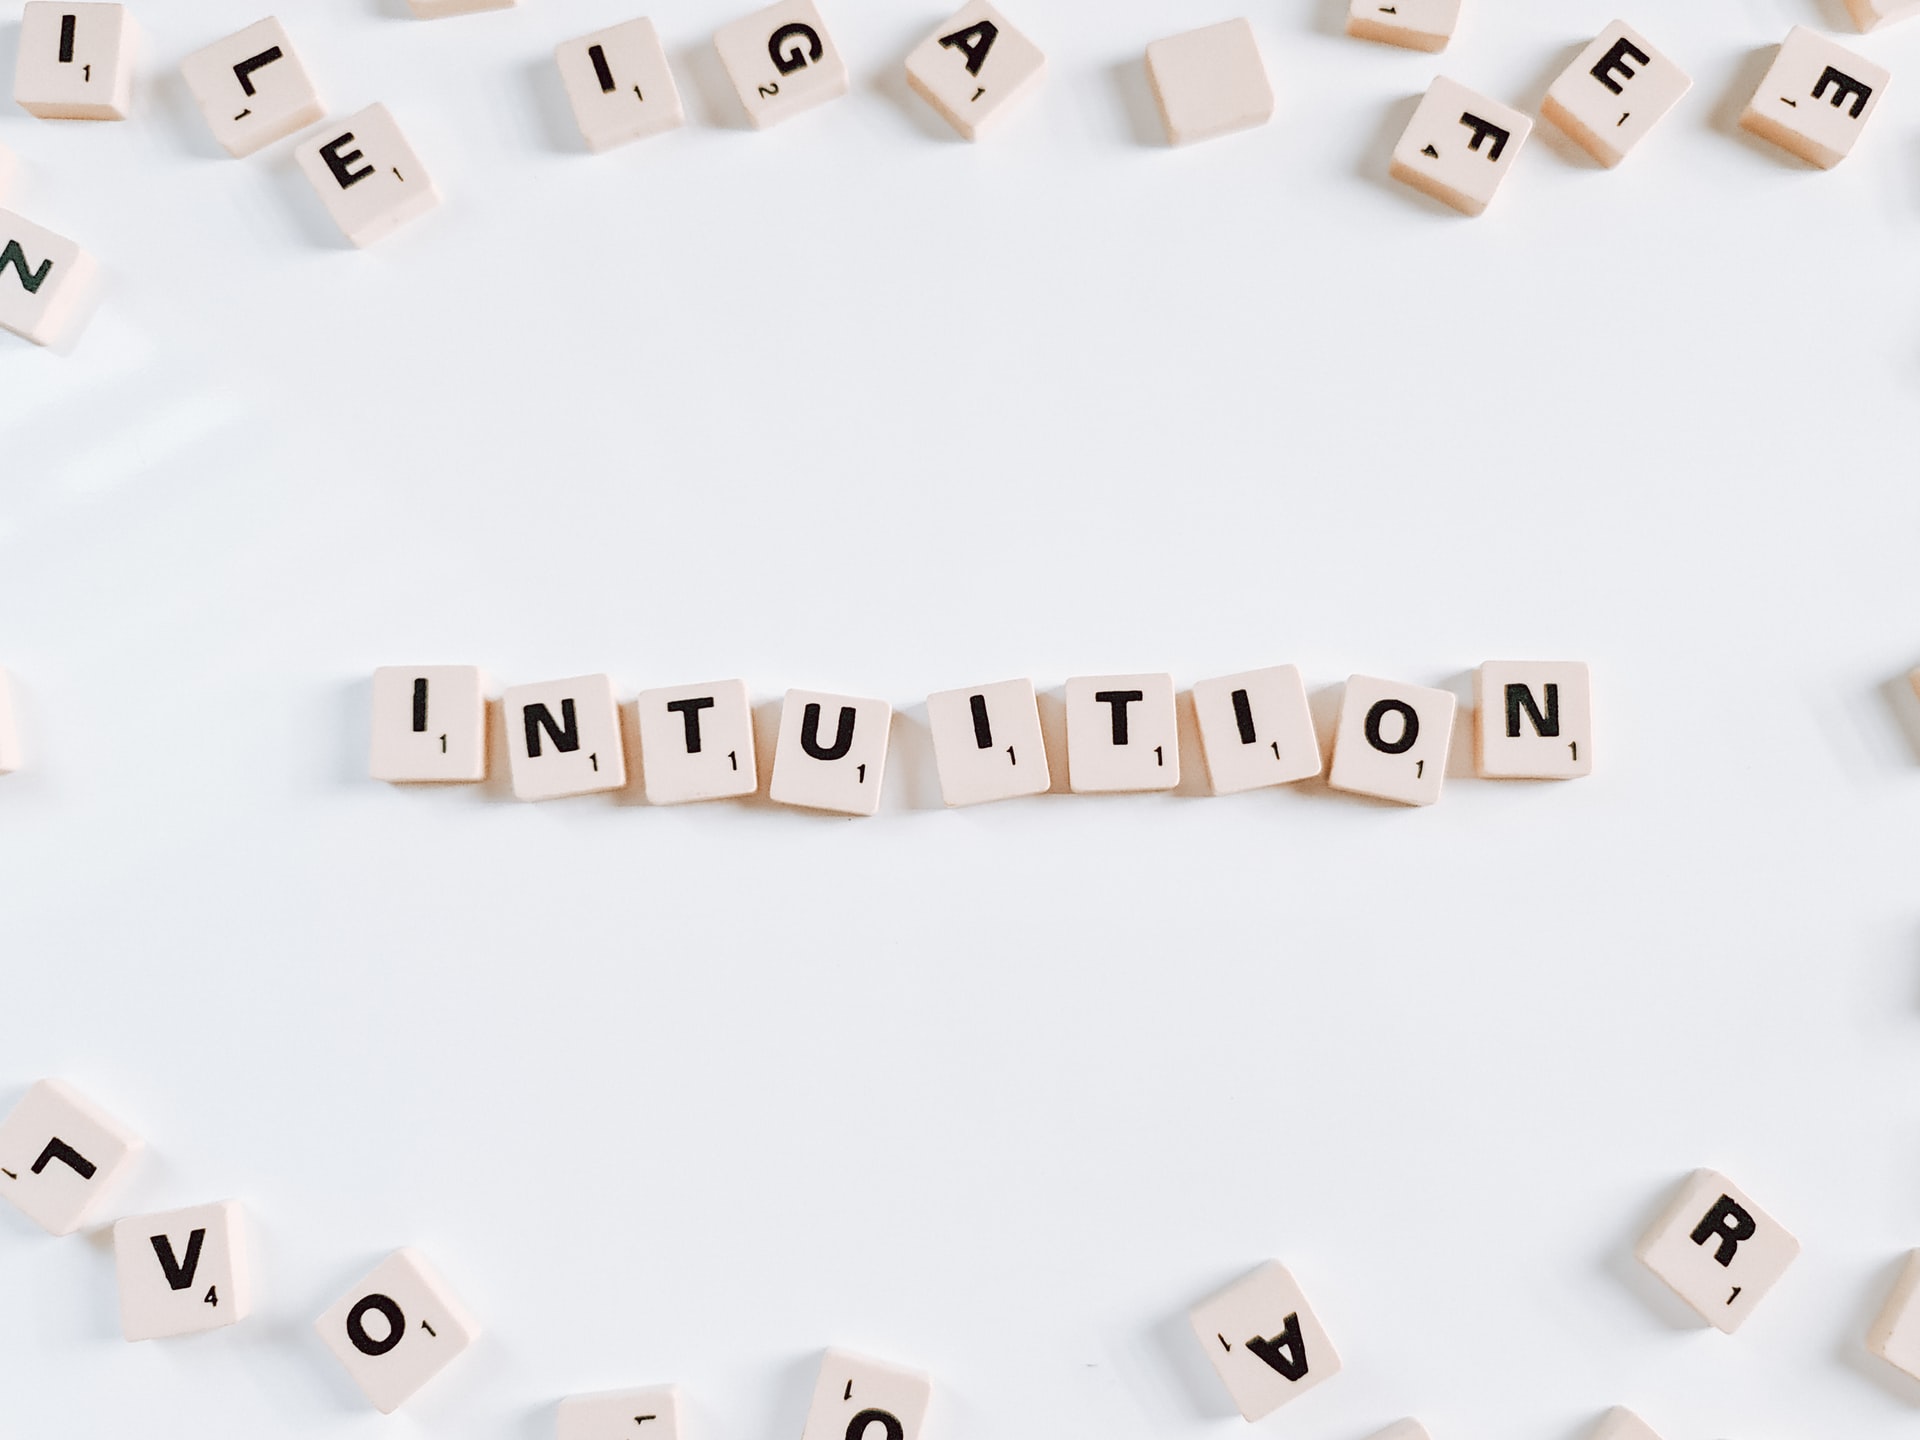 3 Reasons Why Intuition Is an Essential Leadership Skill